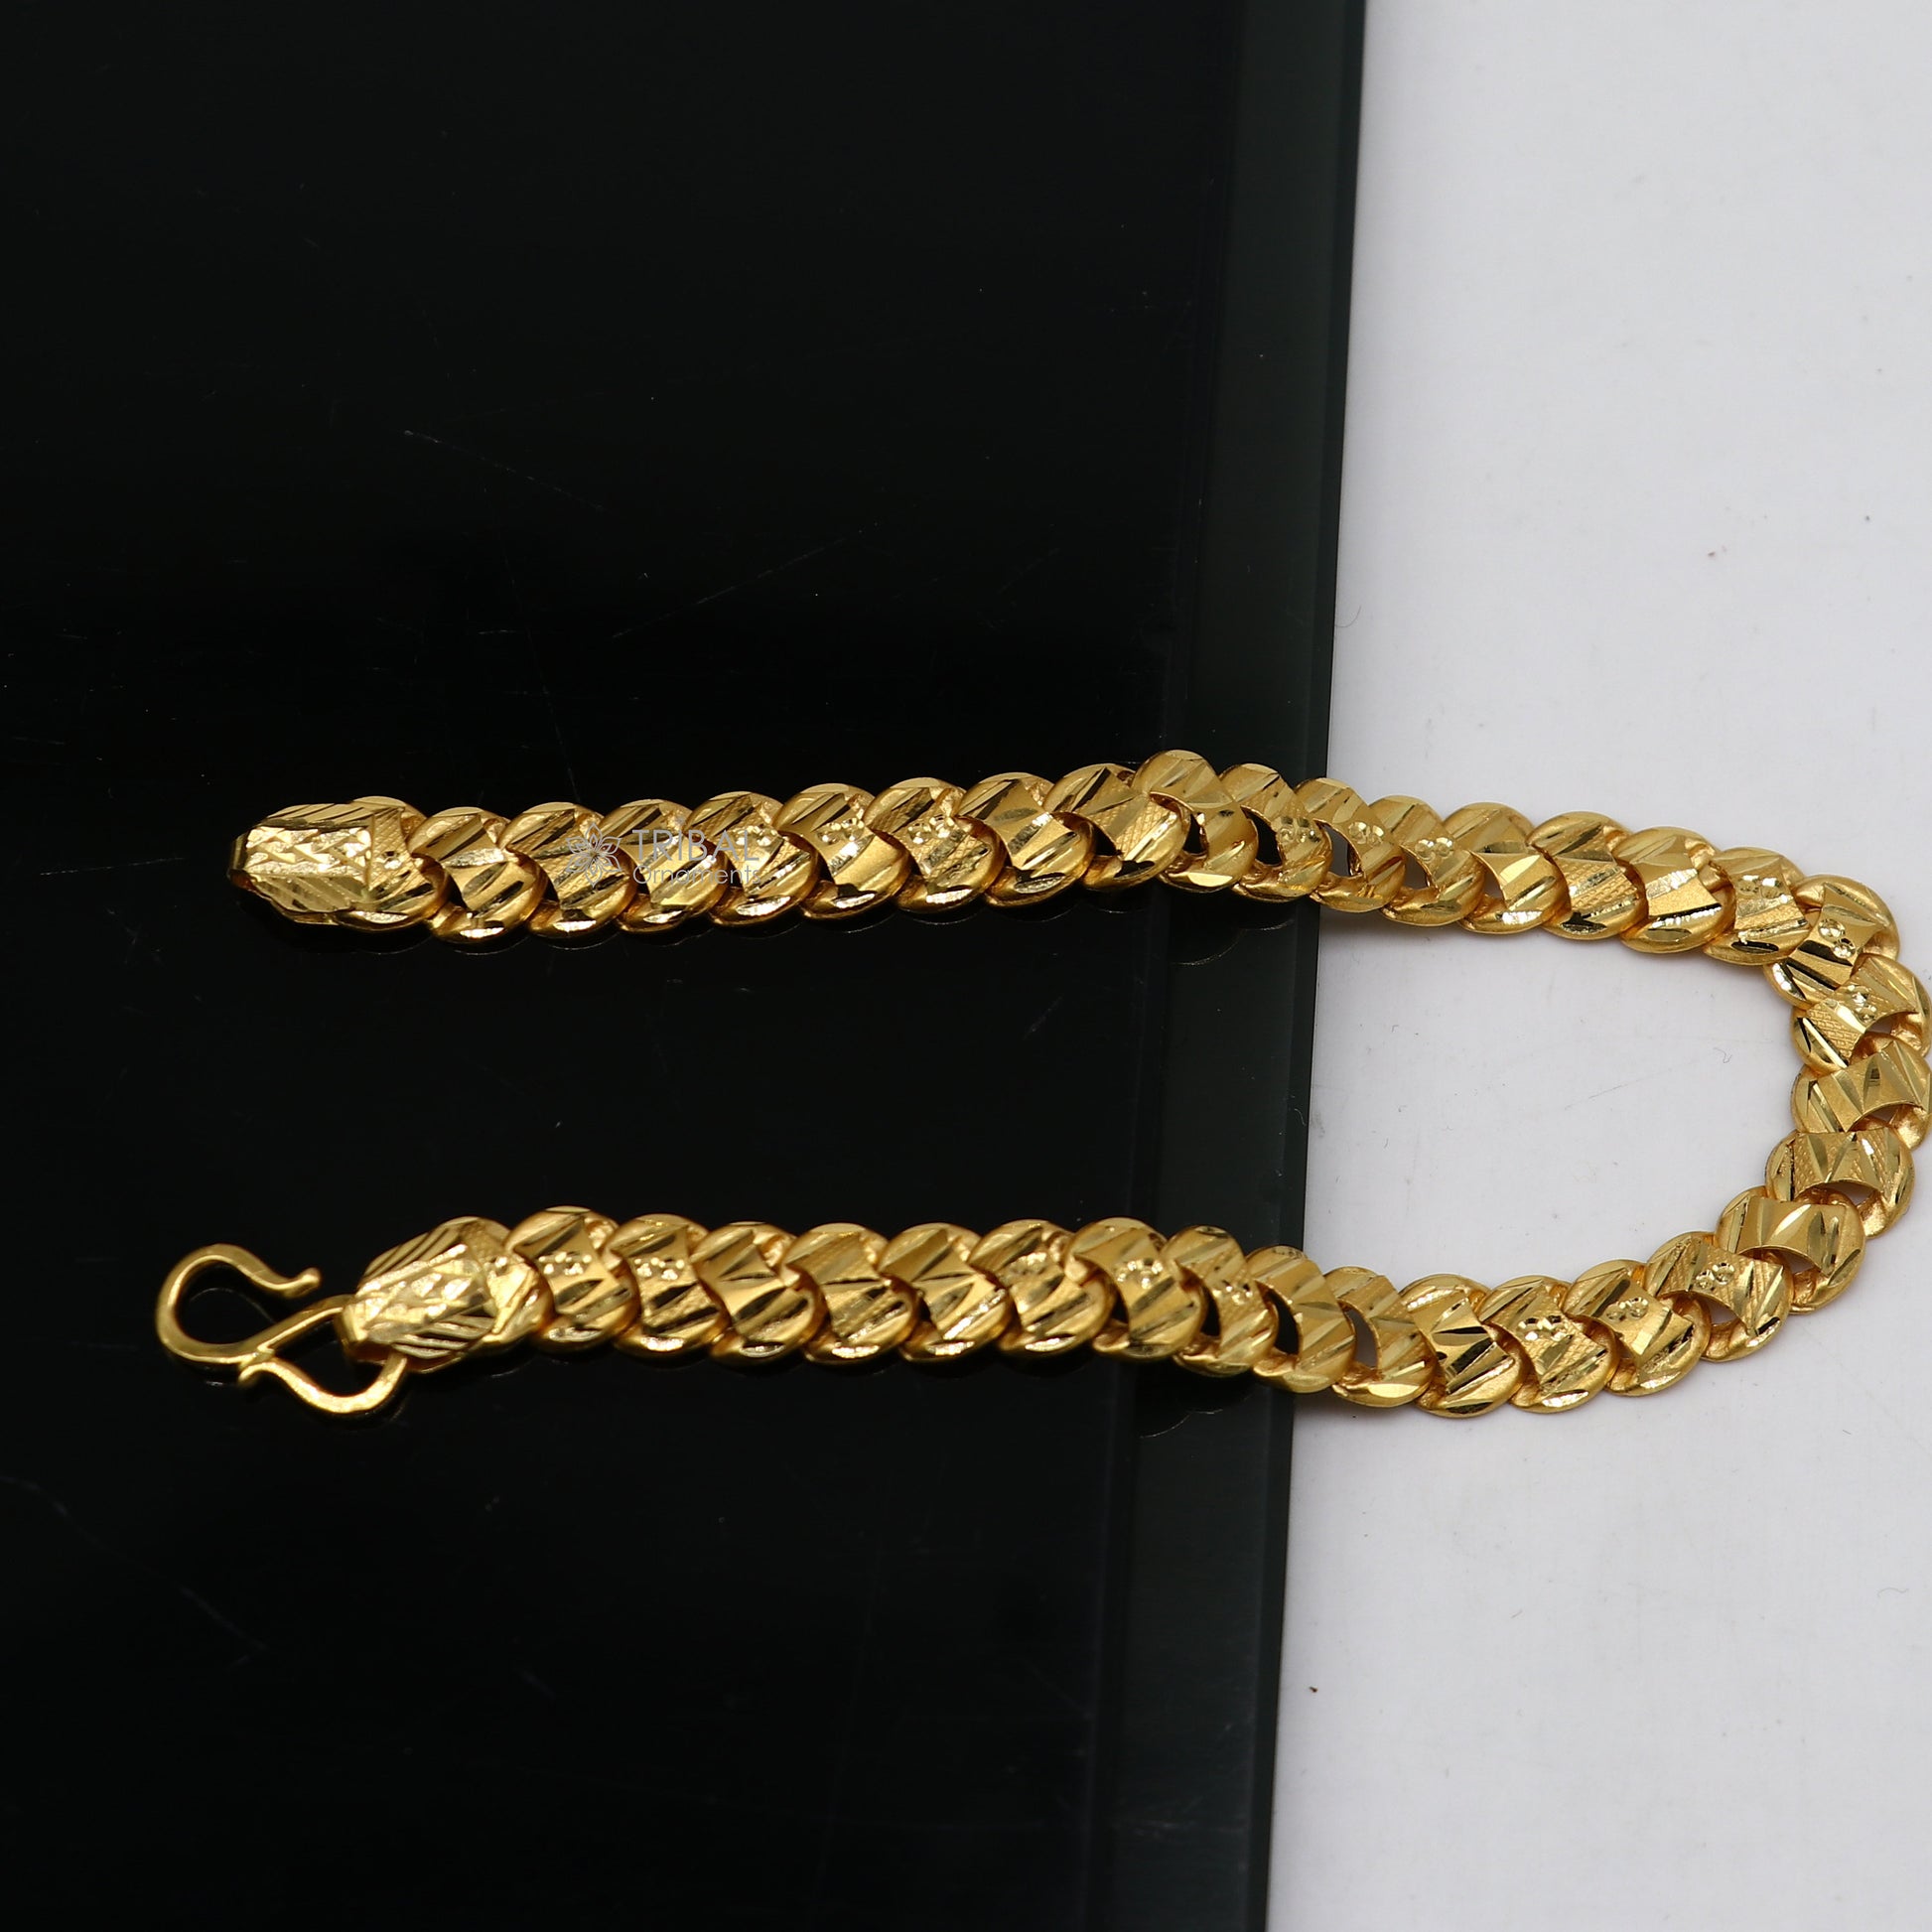 Exclusive trendy unique design handmade 22kt  yellow gold All size bracelet best men's wedding gifting jewelry from india gbr77 - TRIBAL ORNAMENTS